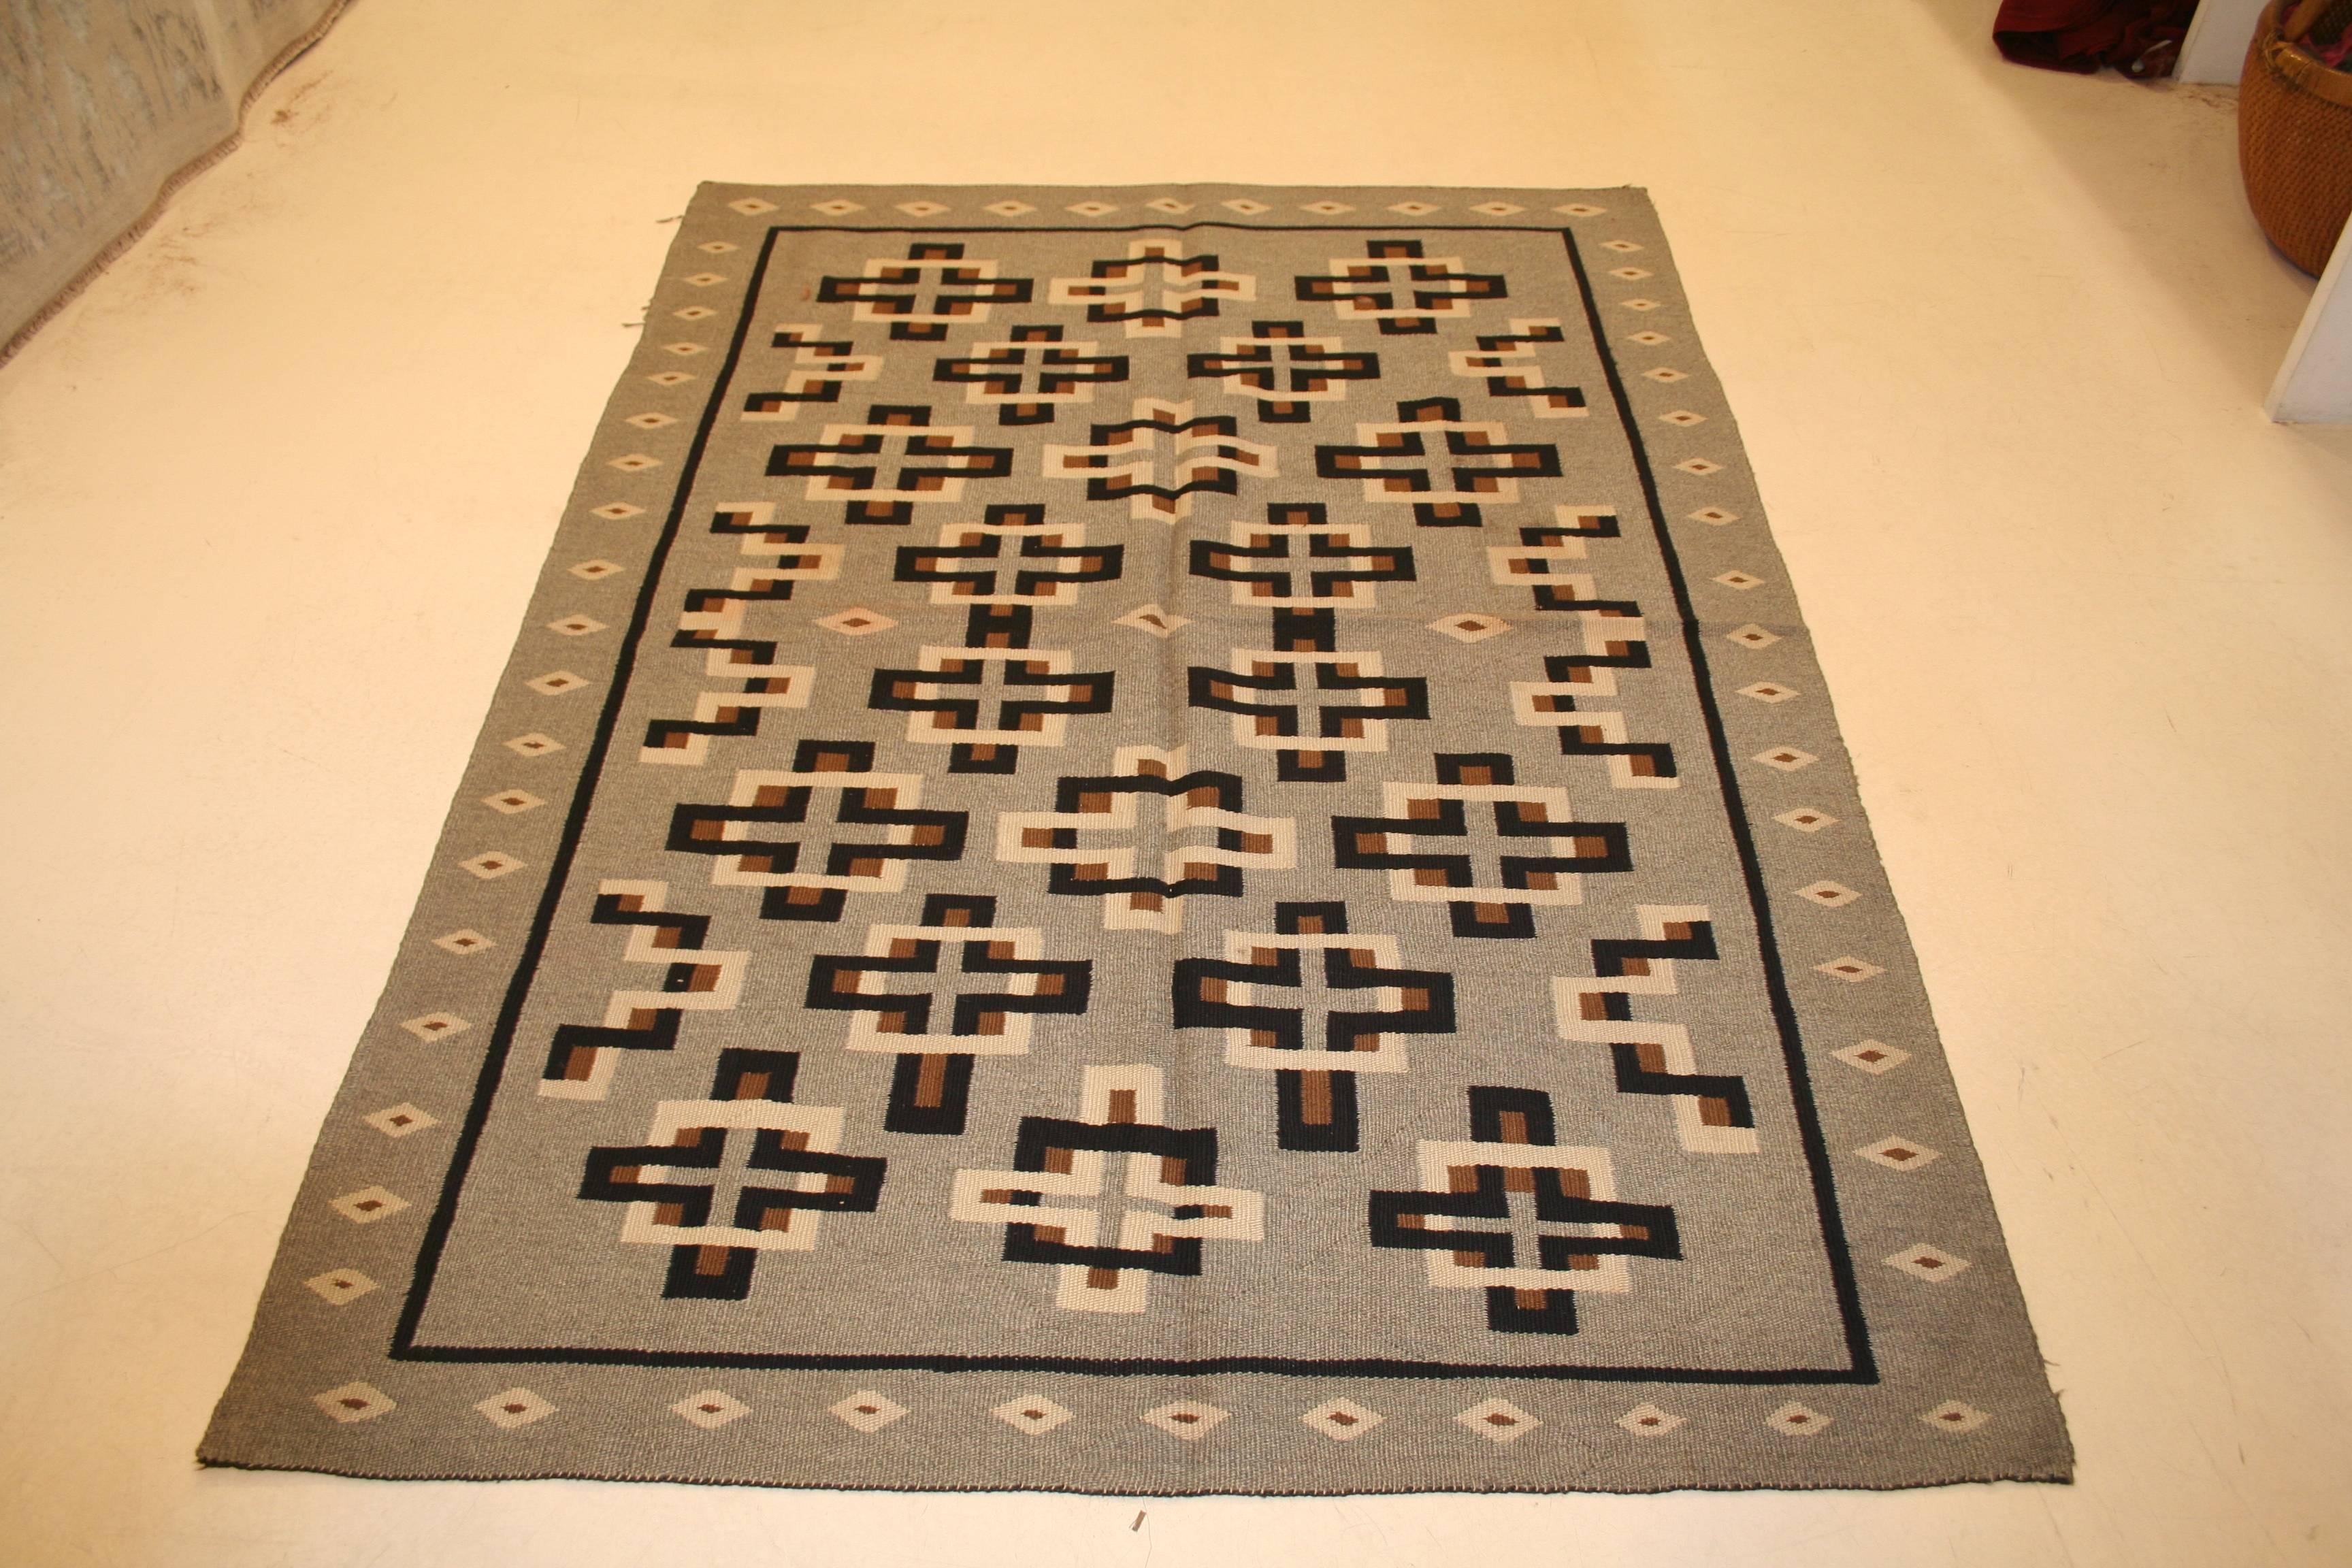 An antique Navajo rug from southwest America distinguished by an allover pattern of cruciform elements on a soft grey background. Rugs if this type have been collected for their authentic folk character, representing a crucial culture that has